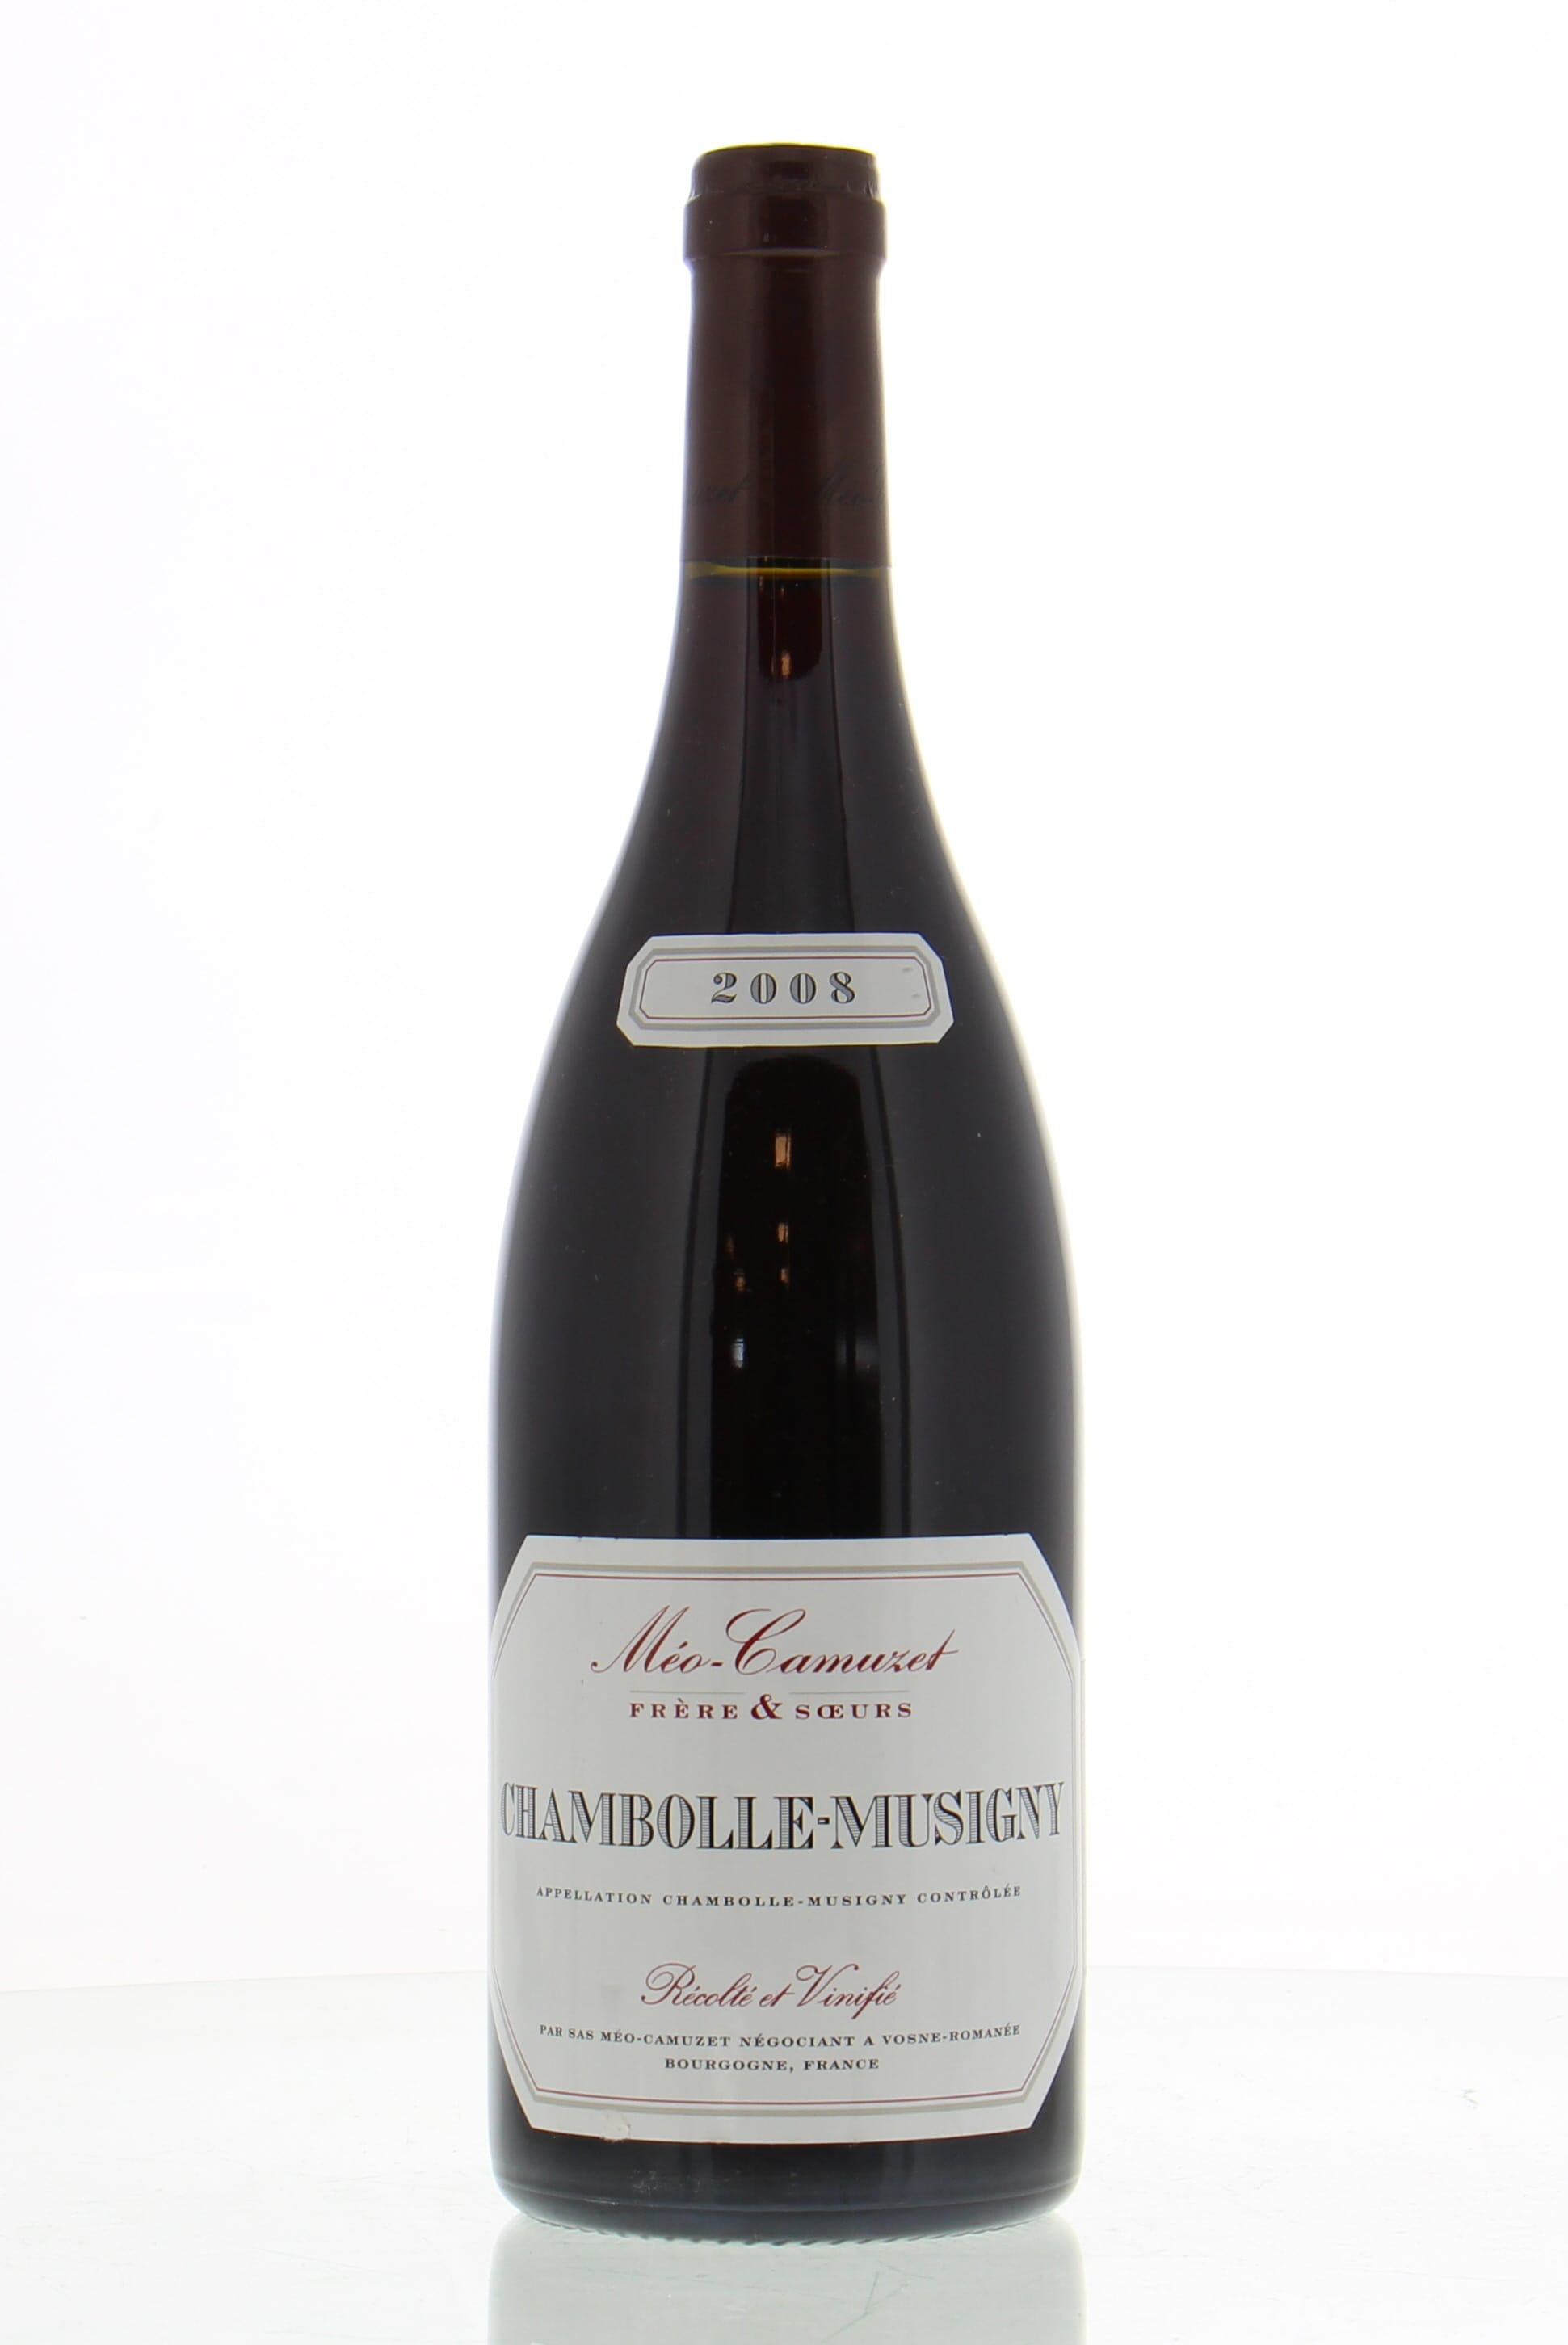 Meo Camuzet - Chambolle Musigny 2008 Perfect